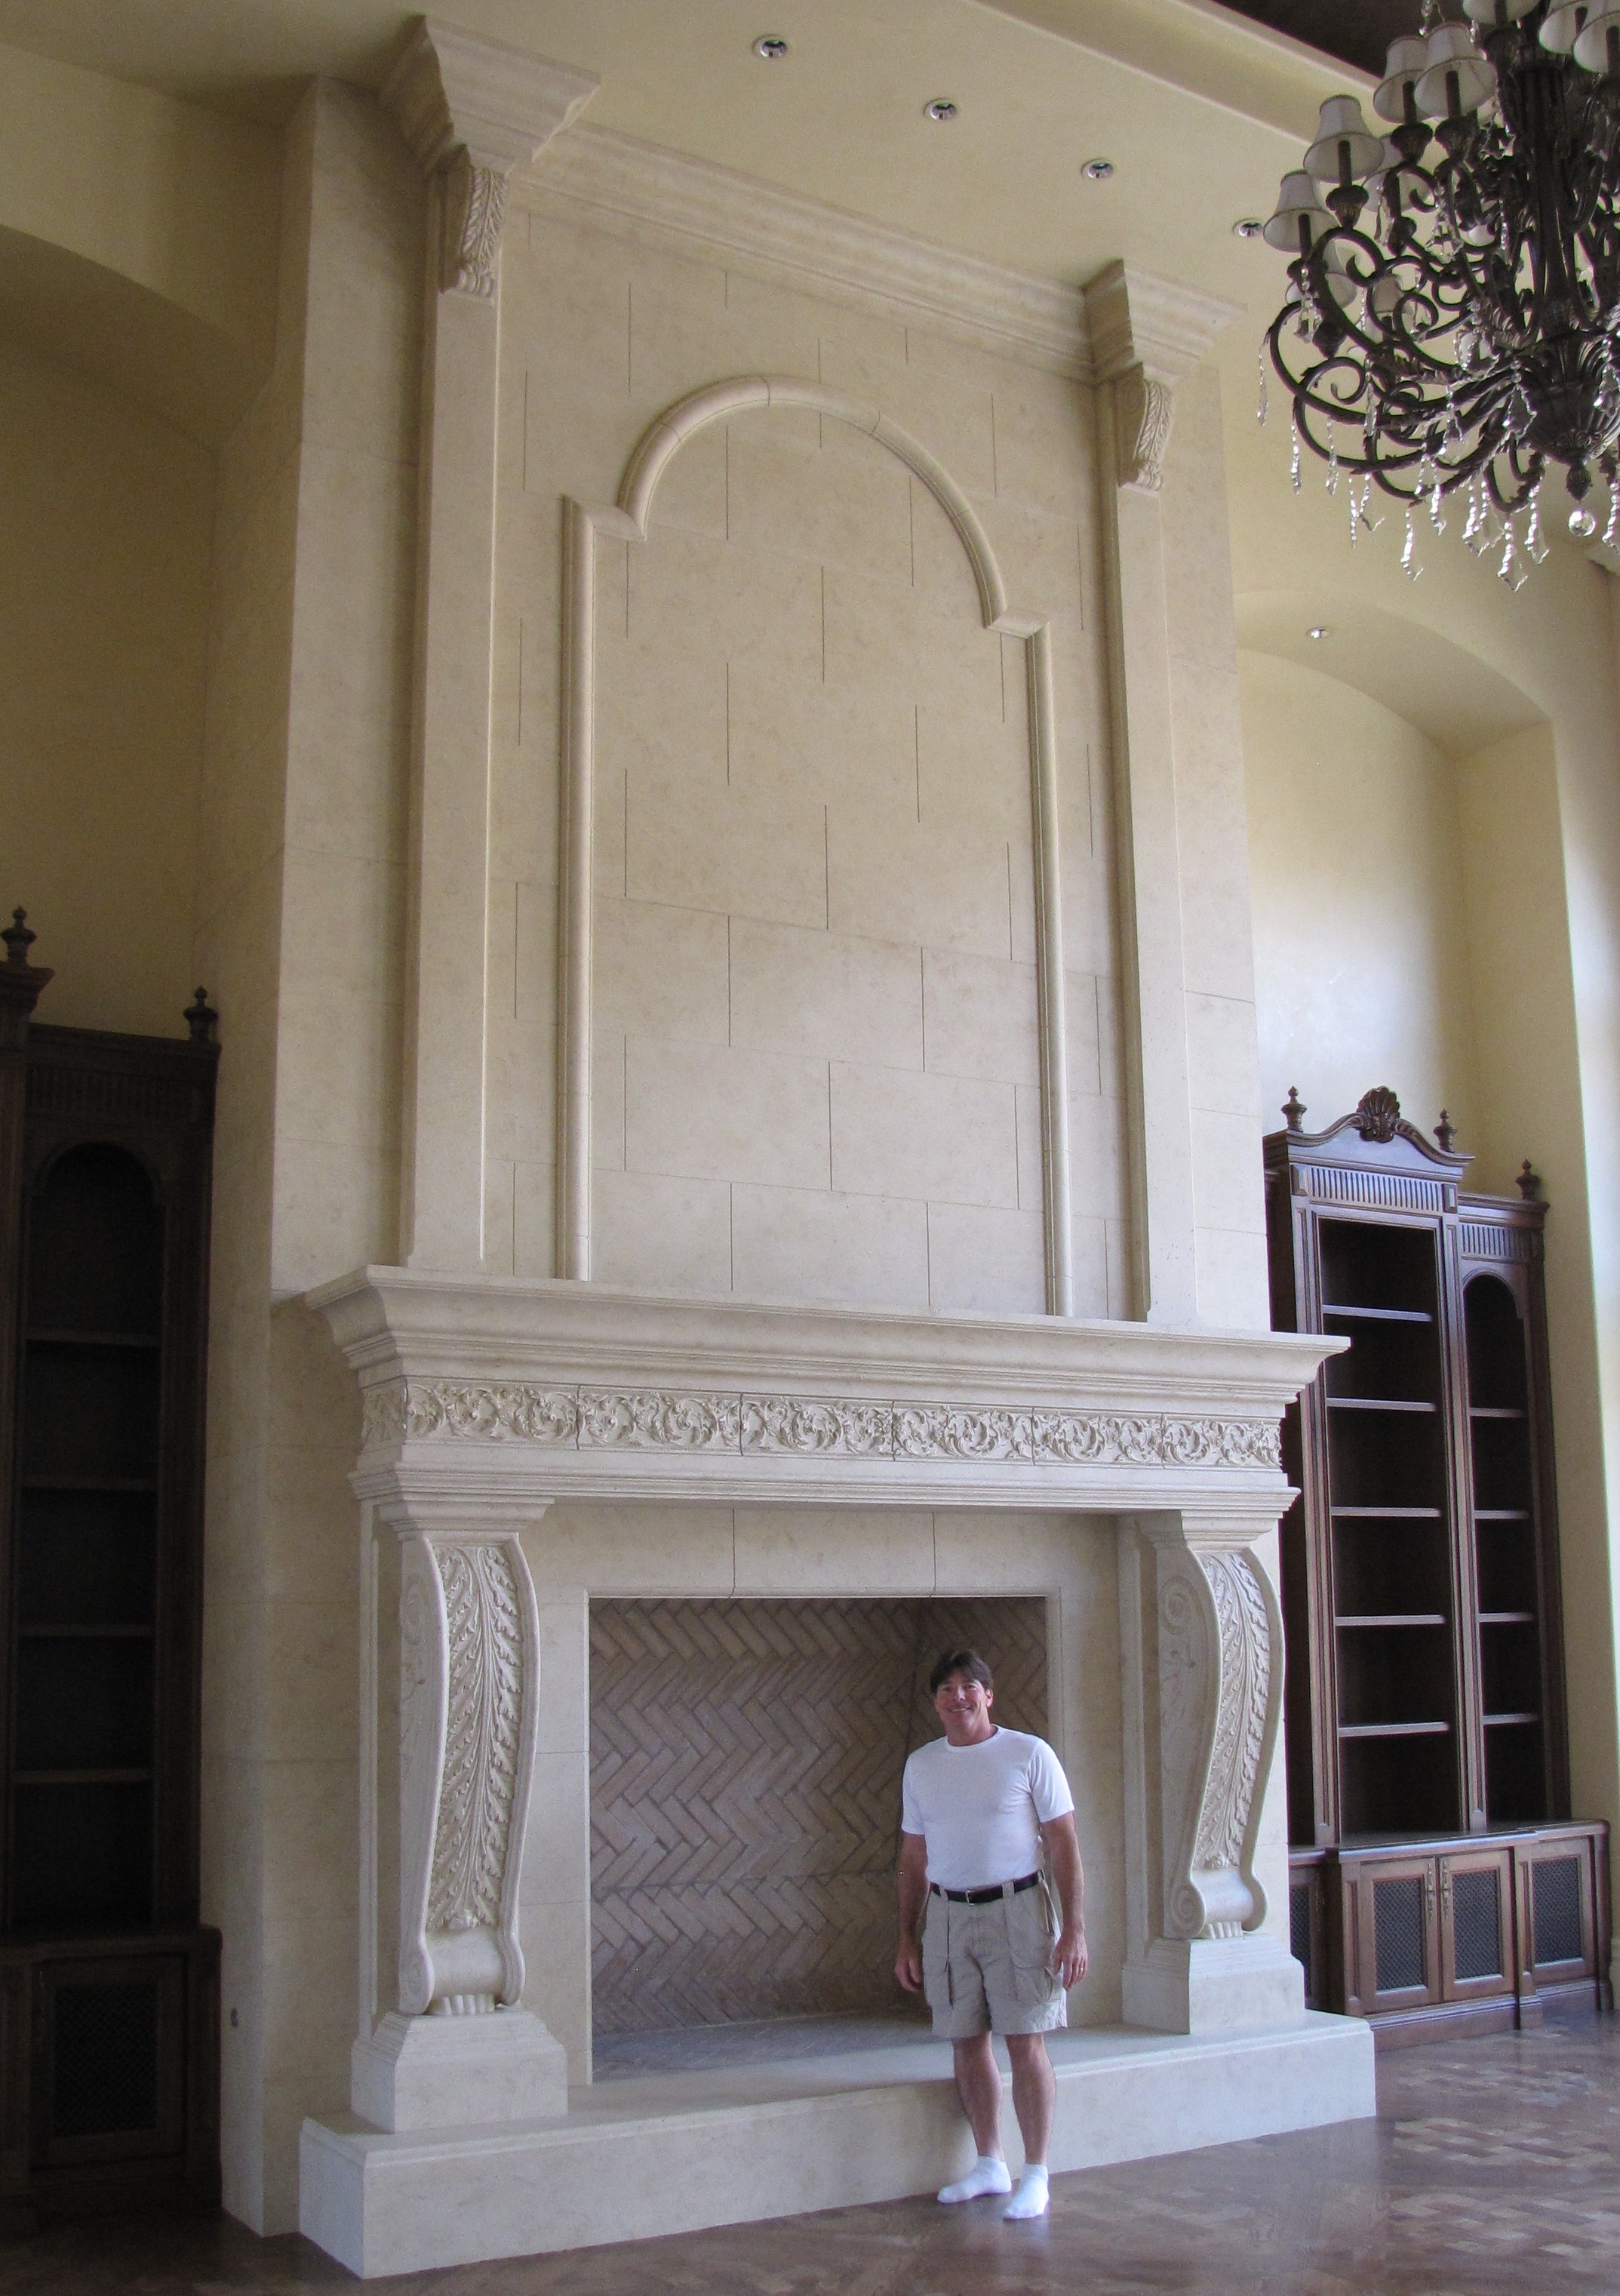  fireplace fronts